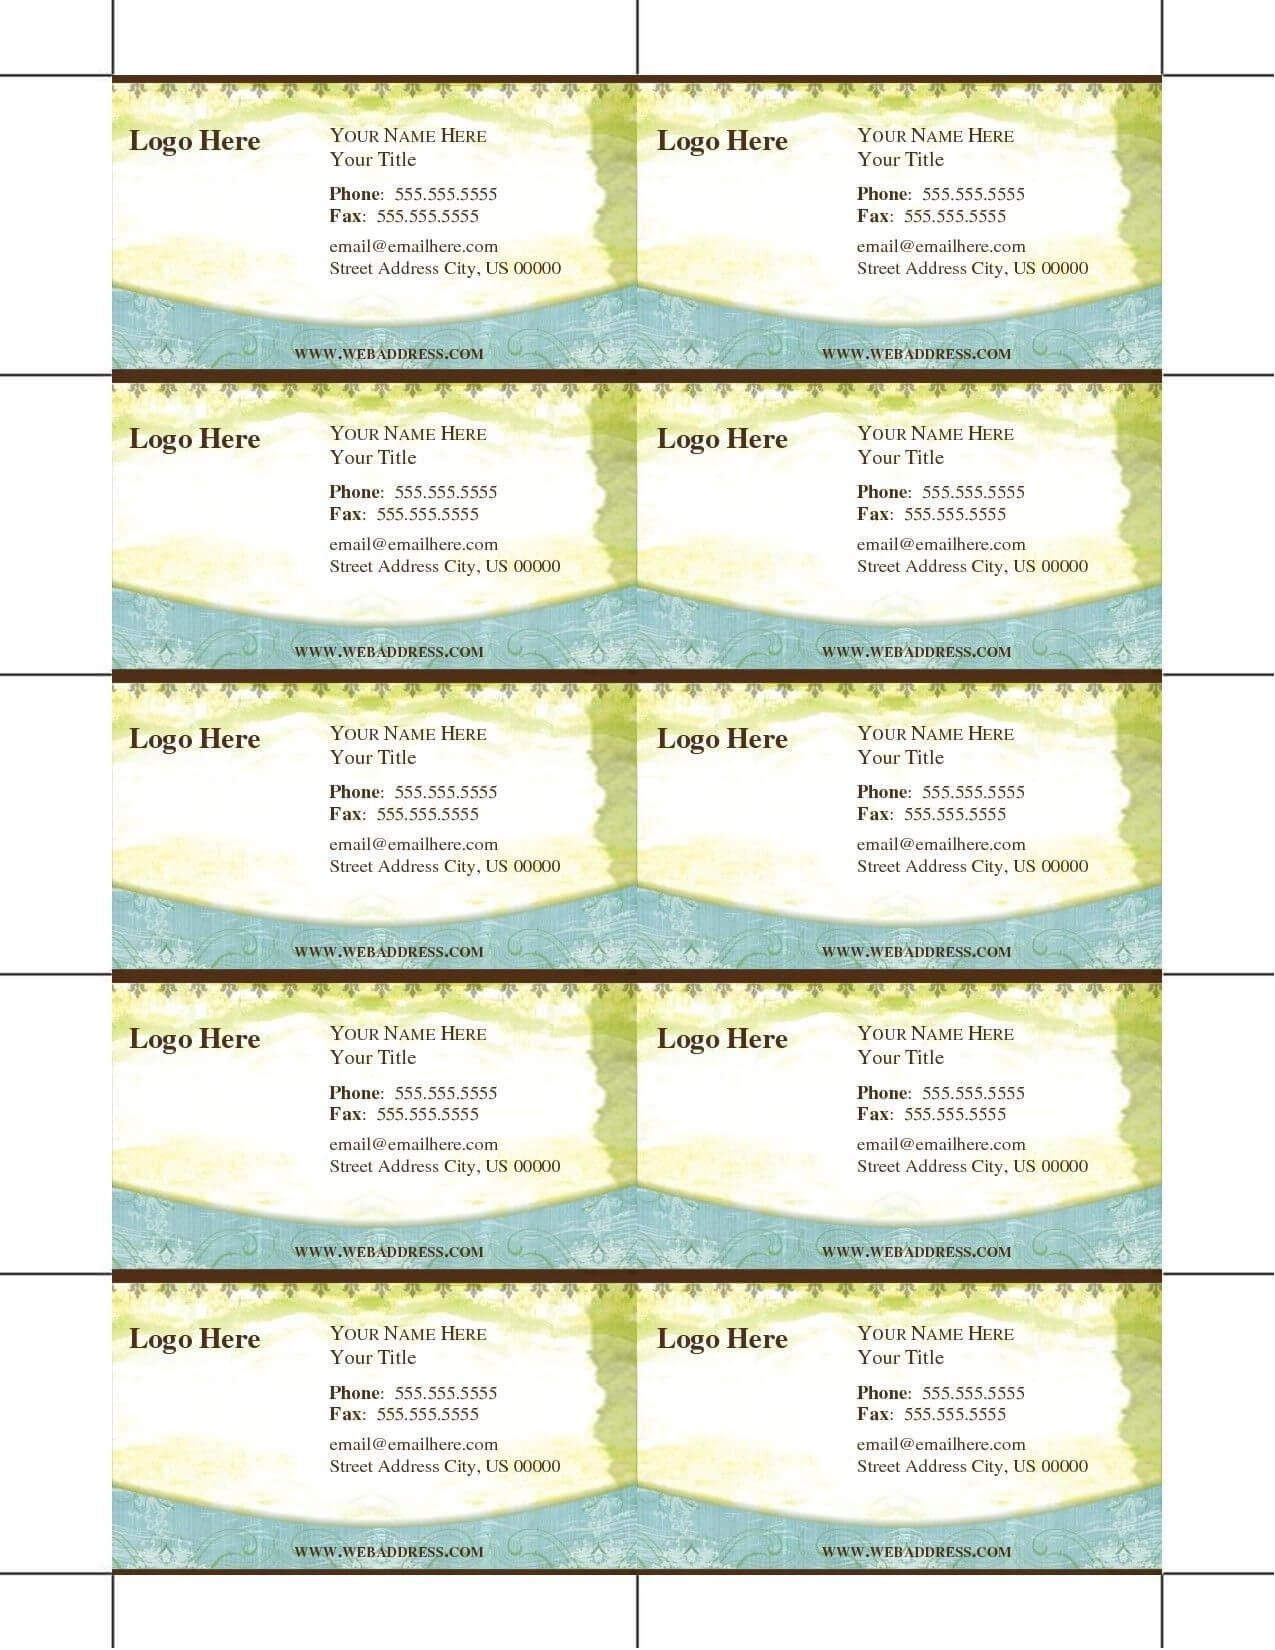 Free Free Business Cards To Print Out At Home Template Regarding Template For Cards To Print Free